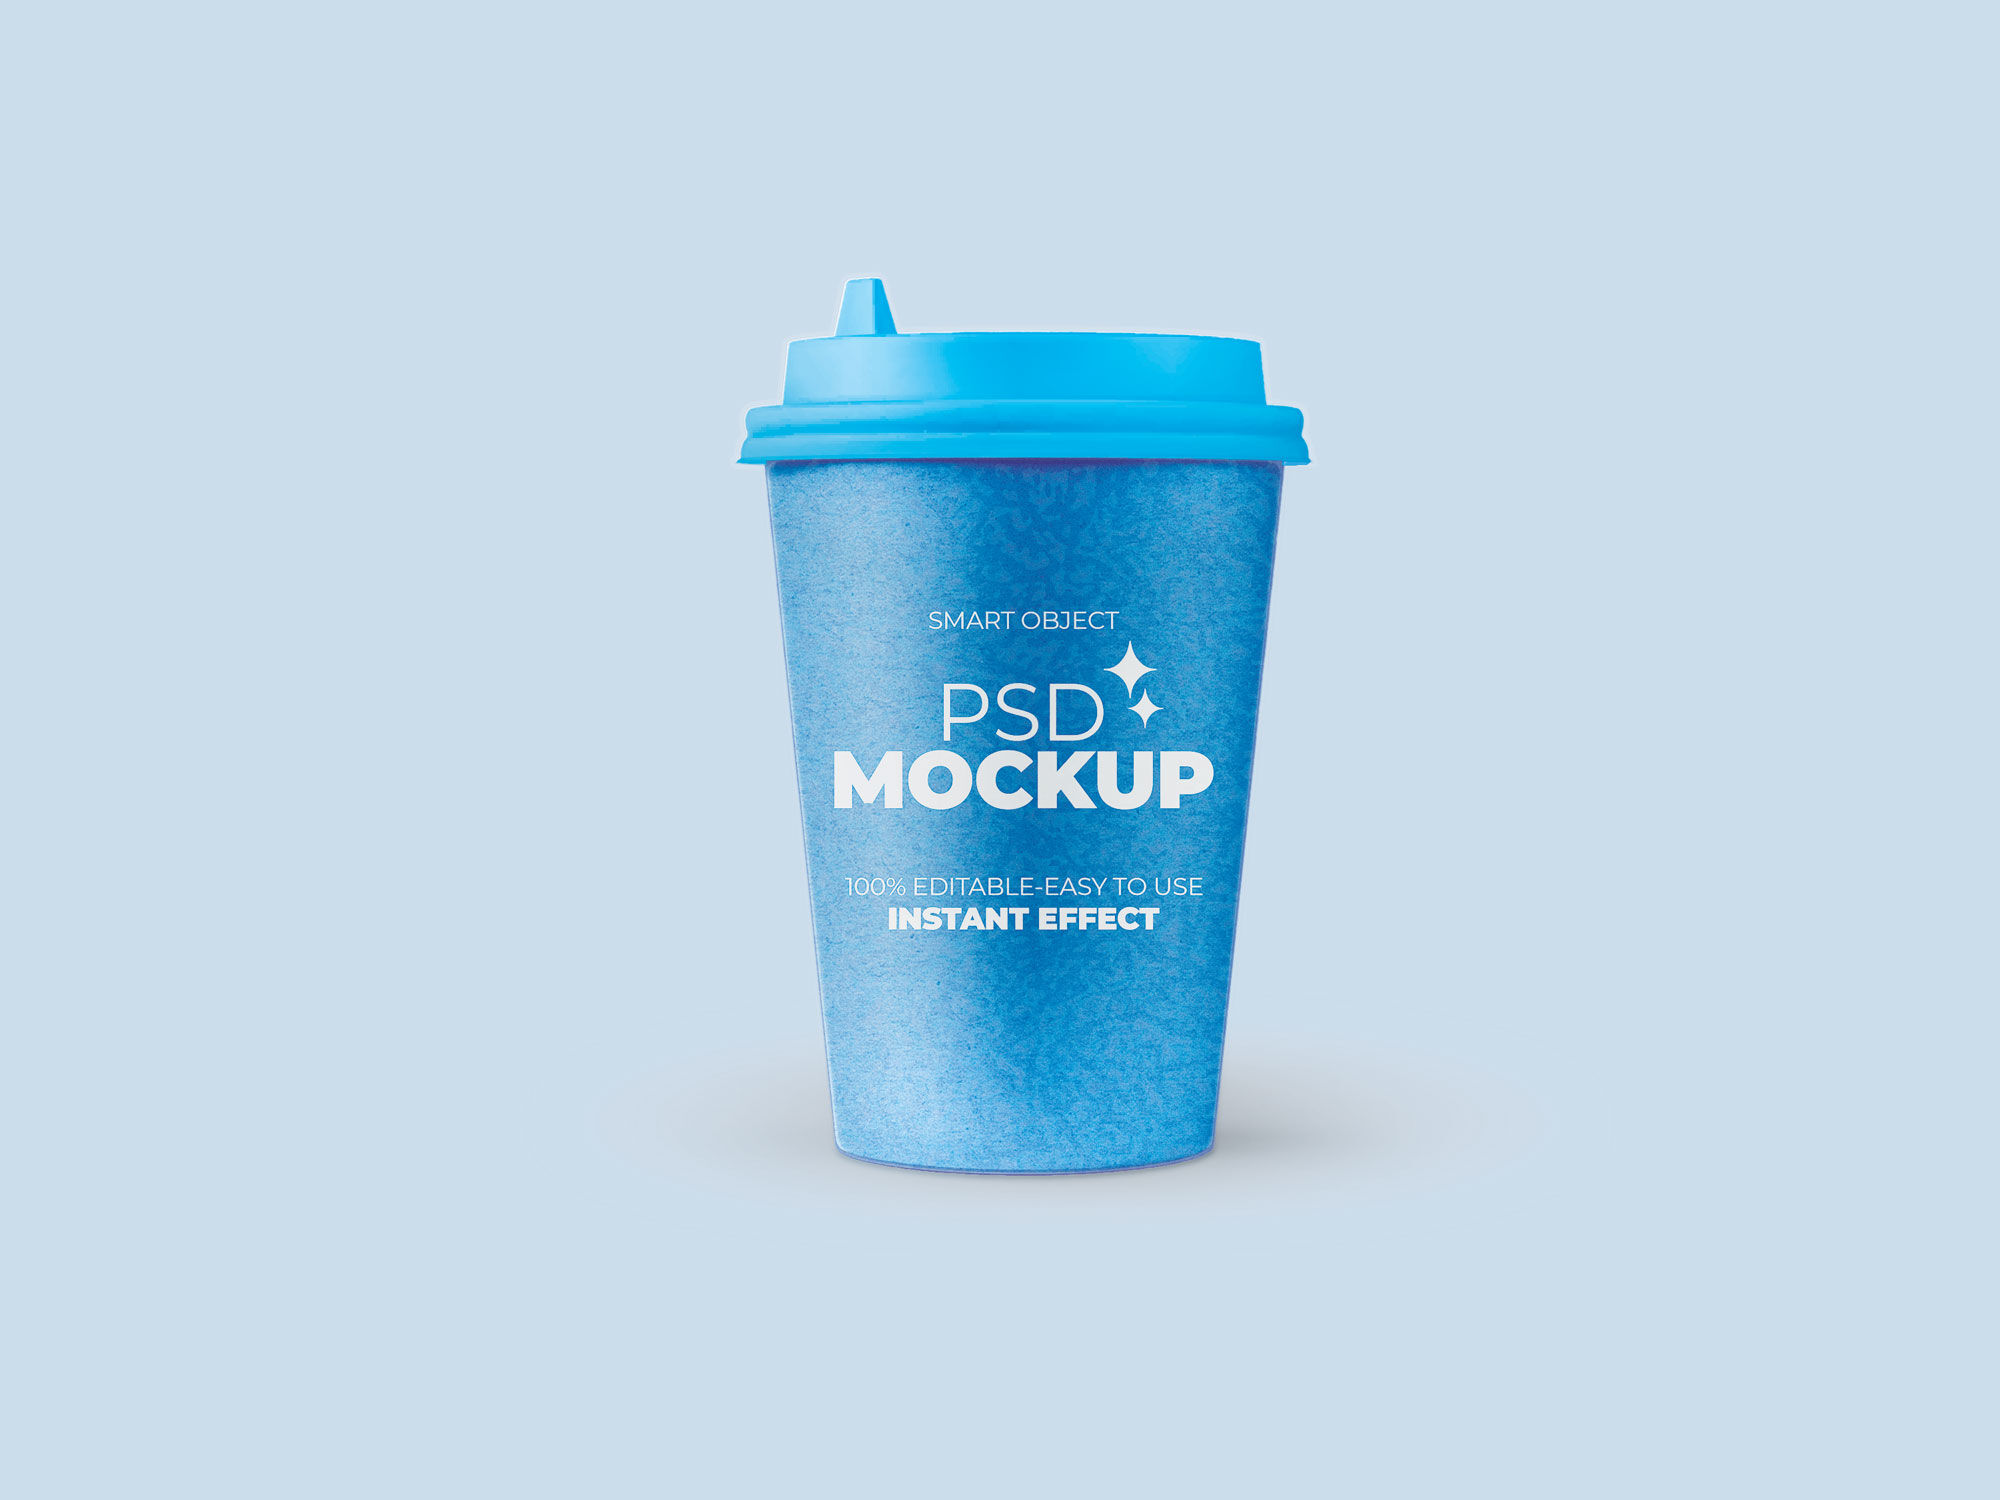 https://resourceboy.com/wp-content/uploads/2022/04/front-view-close-up-shot-coffee-cup-mockup-in-plain-setting.jpg